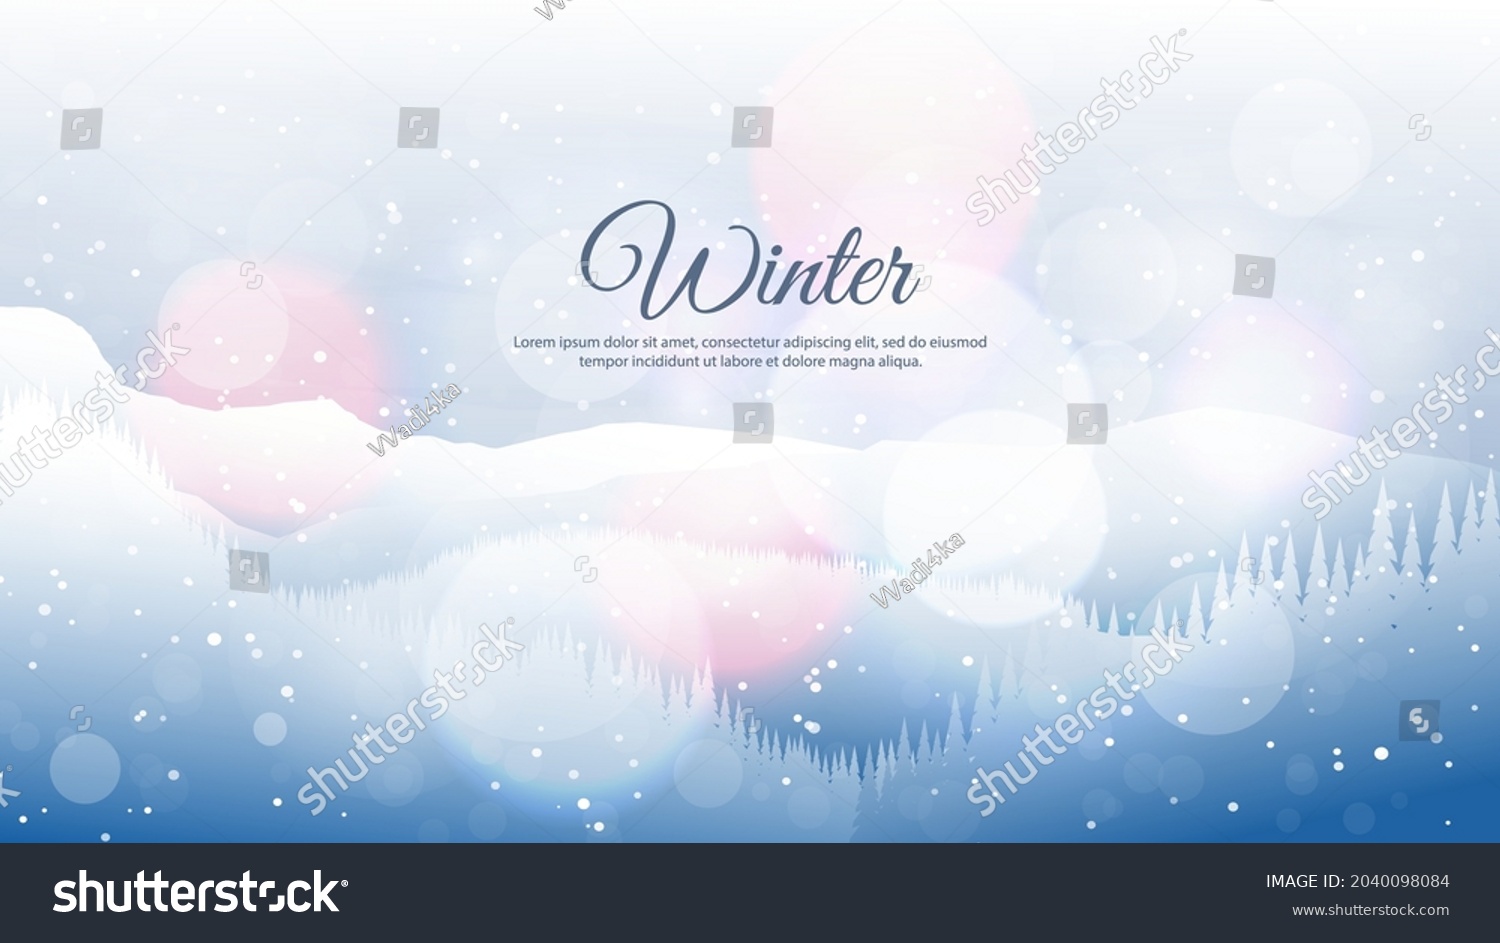 Vector illustration. Flat landscape. Snowy background. Snowdrifts. Snowfall. Clear blue sky. Blizzard. Cartoon wallpaper. Winter season. Forest trees and mountains. Design for website. Blurred lights #2040098084